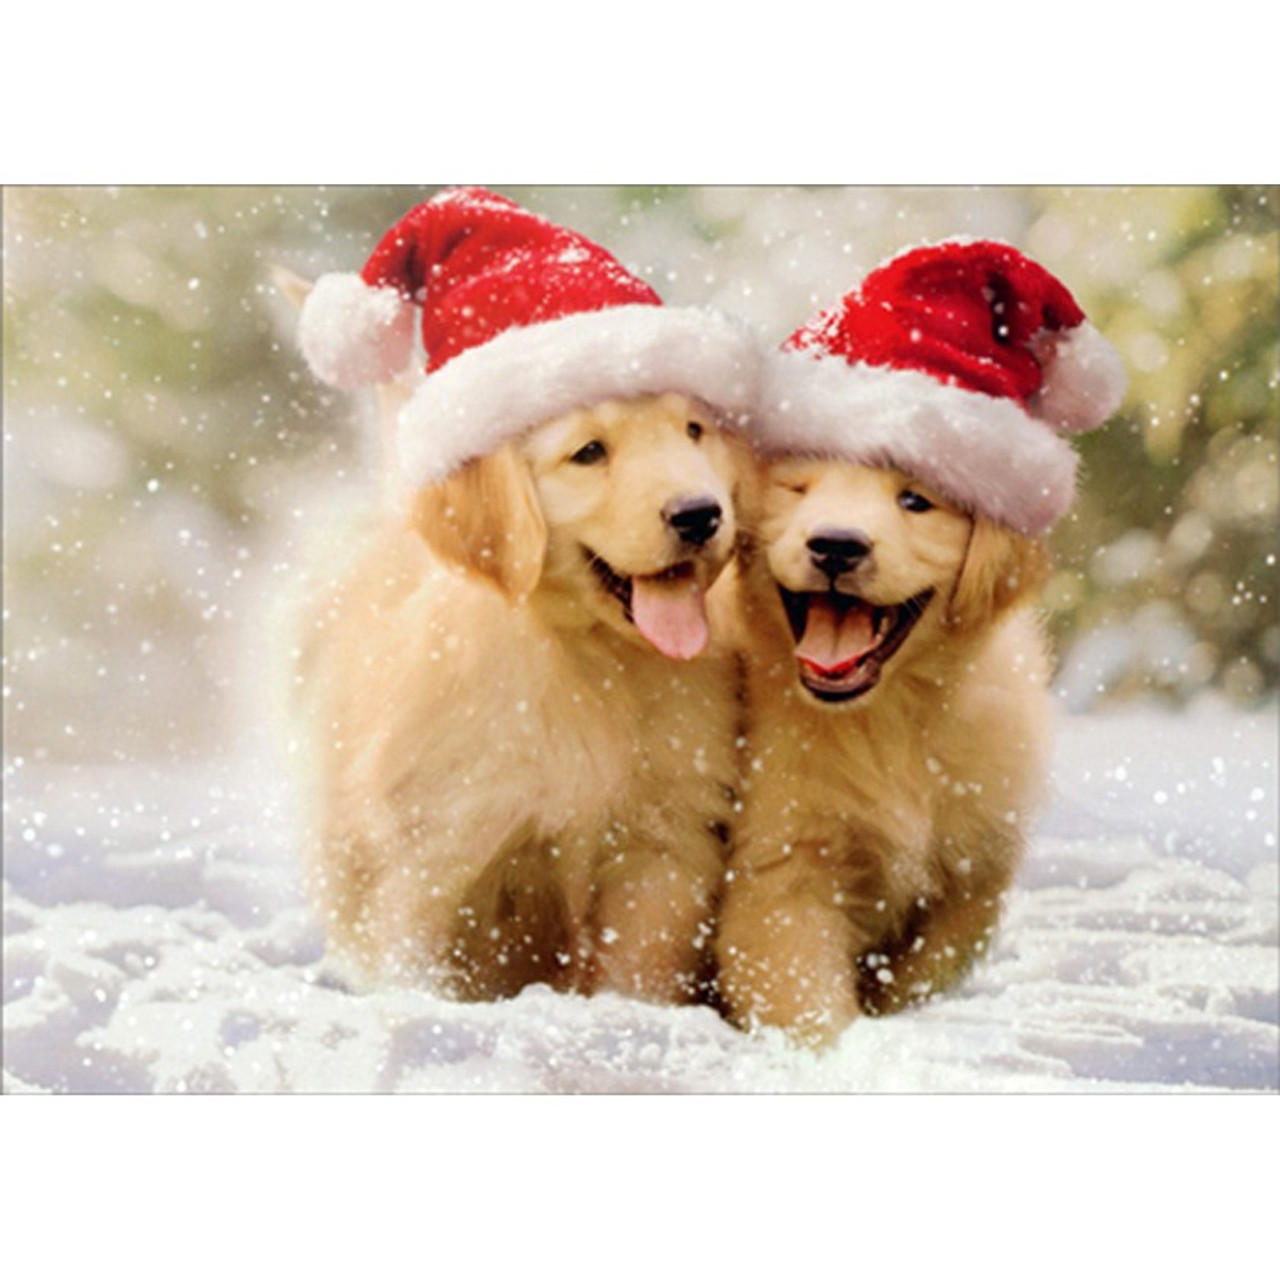 Two Golden Puppies Running in Snow Cute Dogs Christmas Card ...